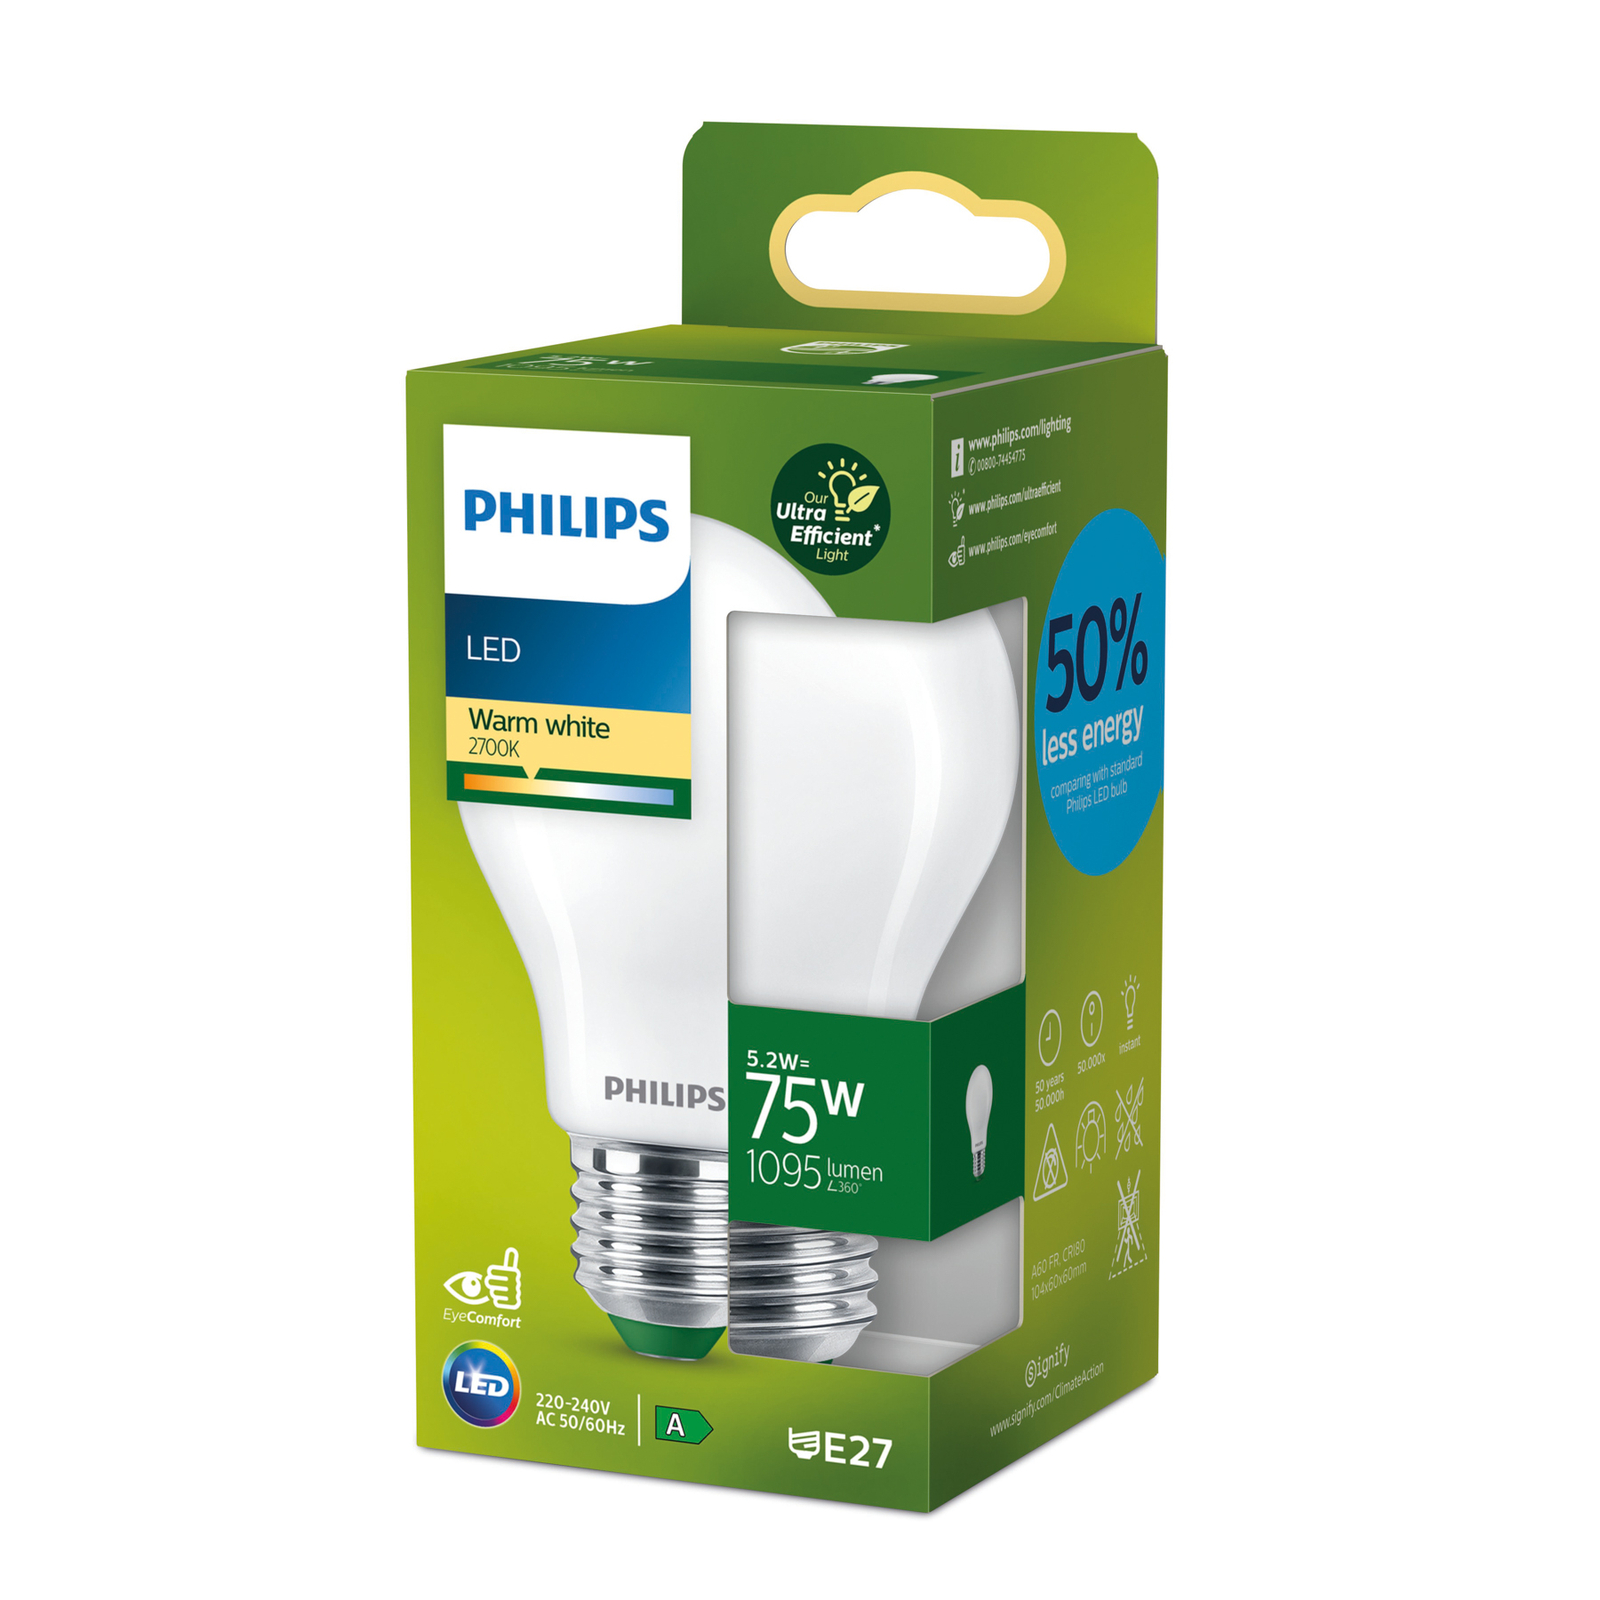 Philips E27 Lamp A60 5.2W 1095lm 2,700K mate